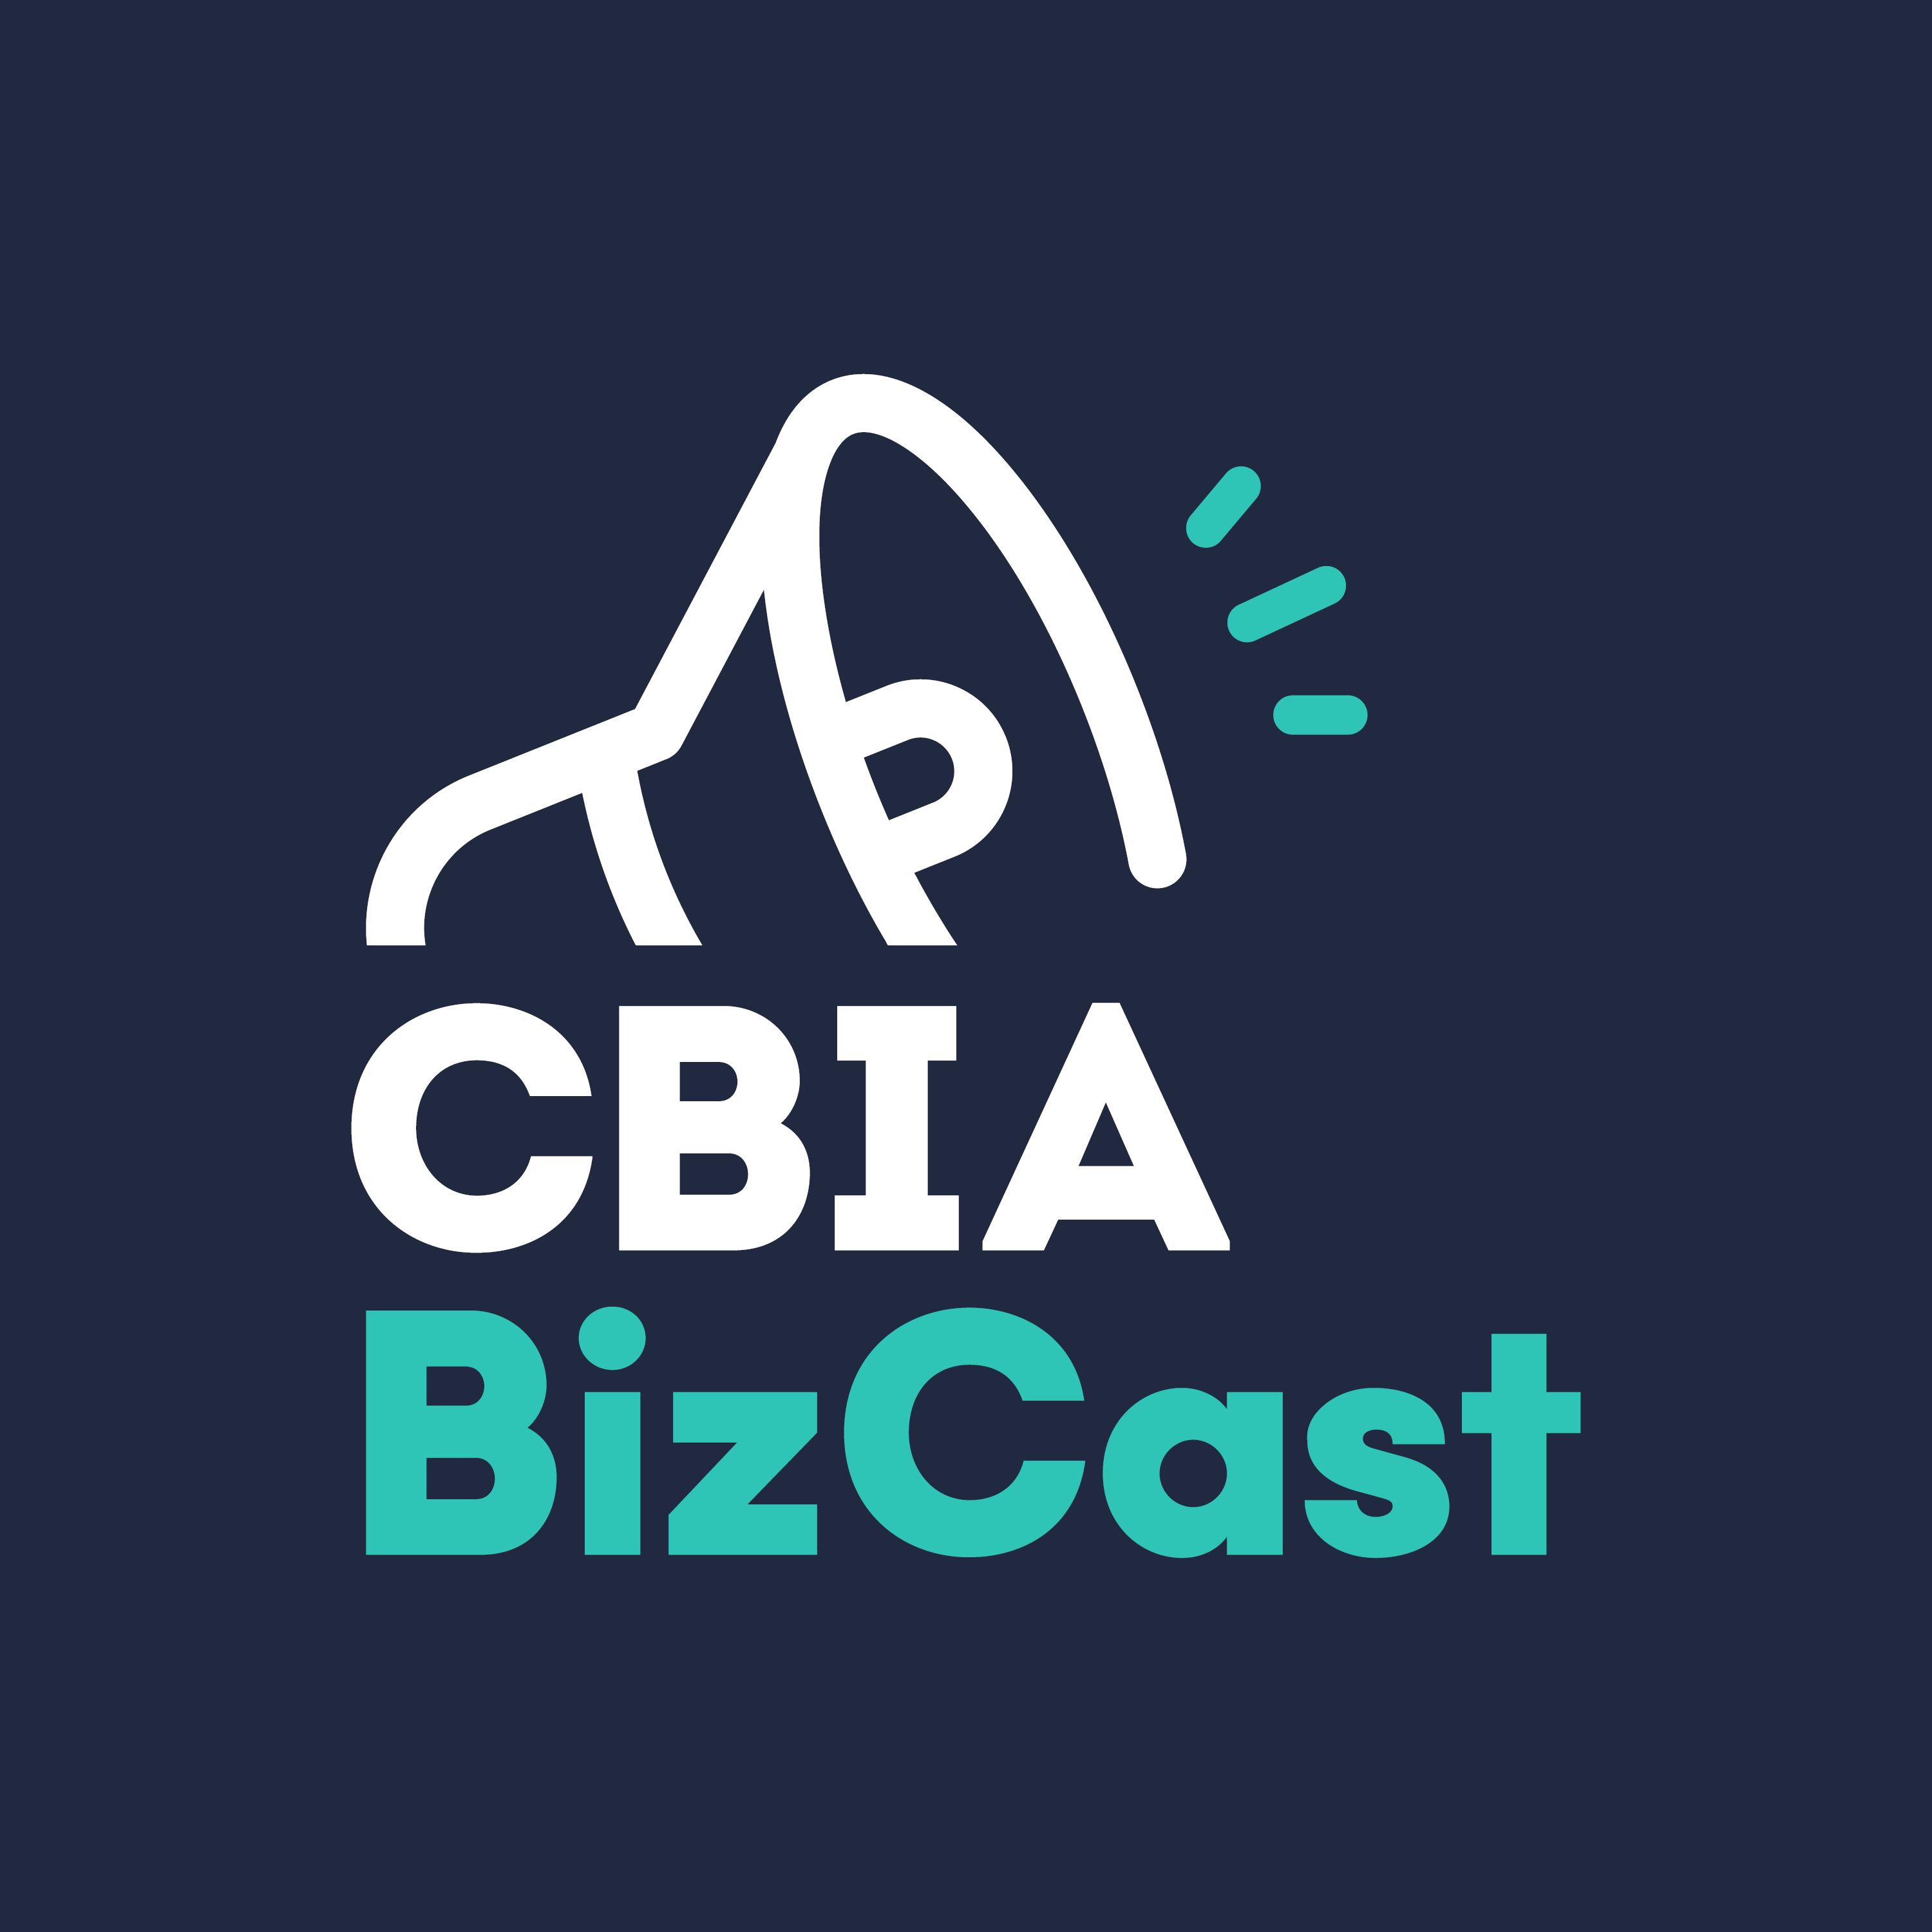 CBIA BizCast: Cooper Reviews Time As State’s First CMO